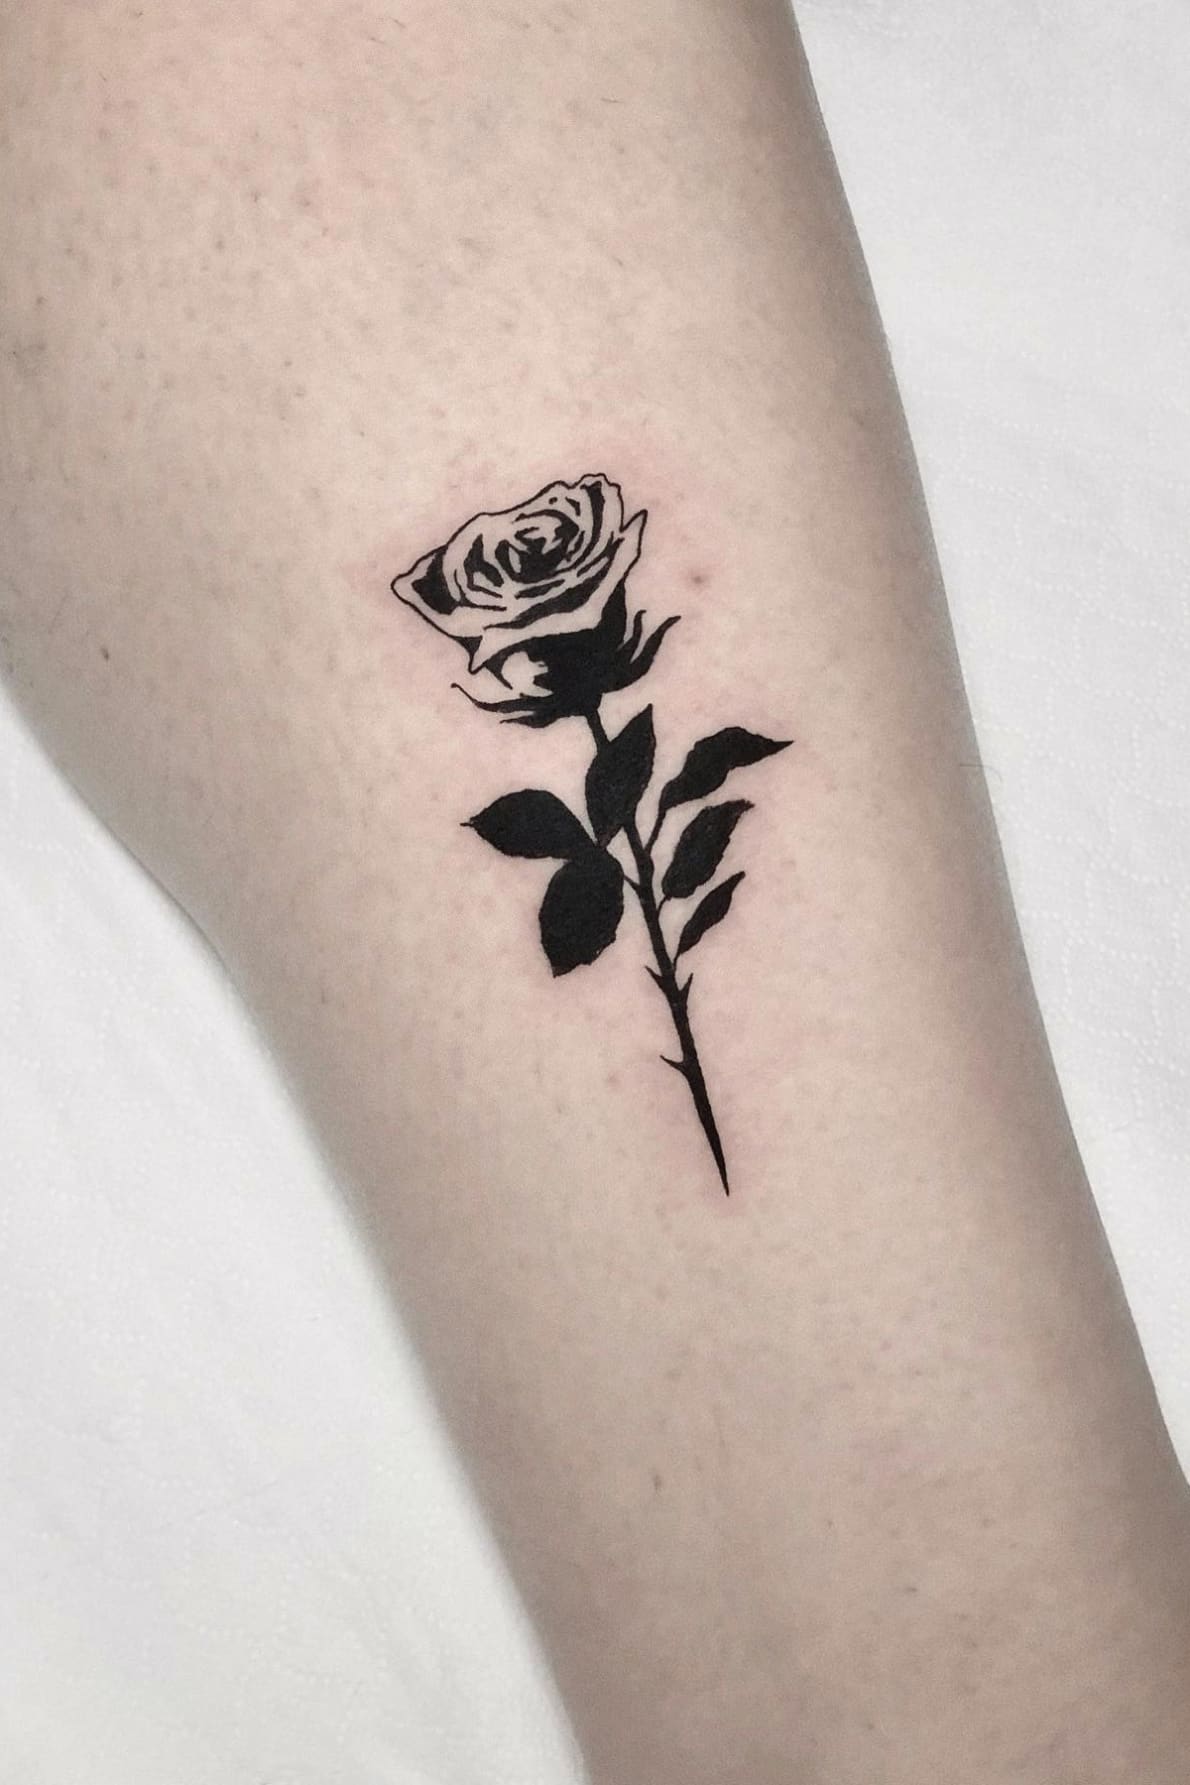 Small black and white rose tattoo